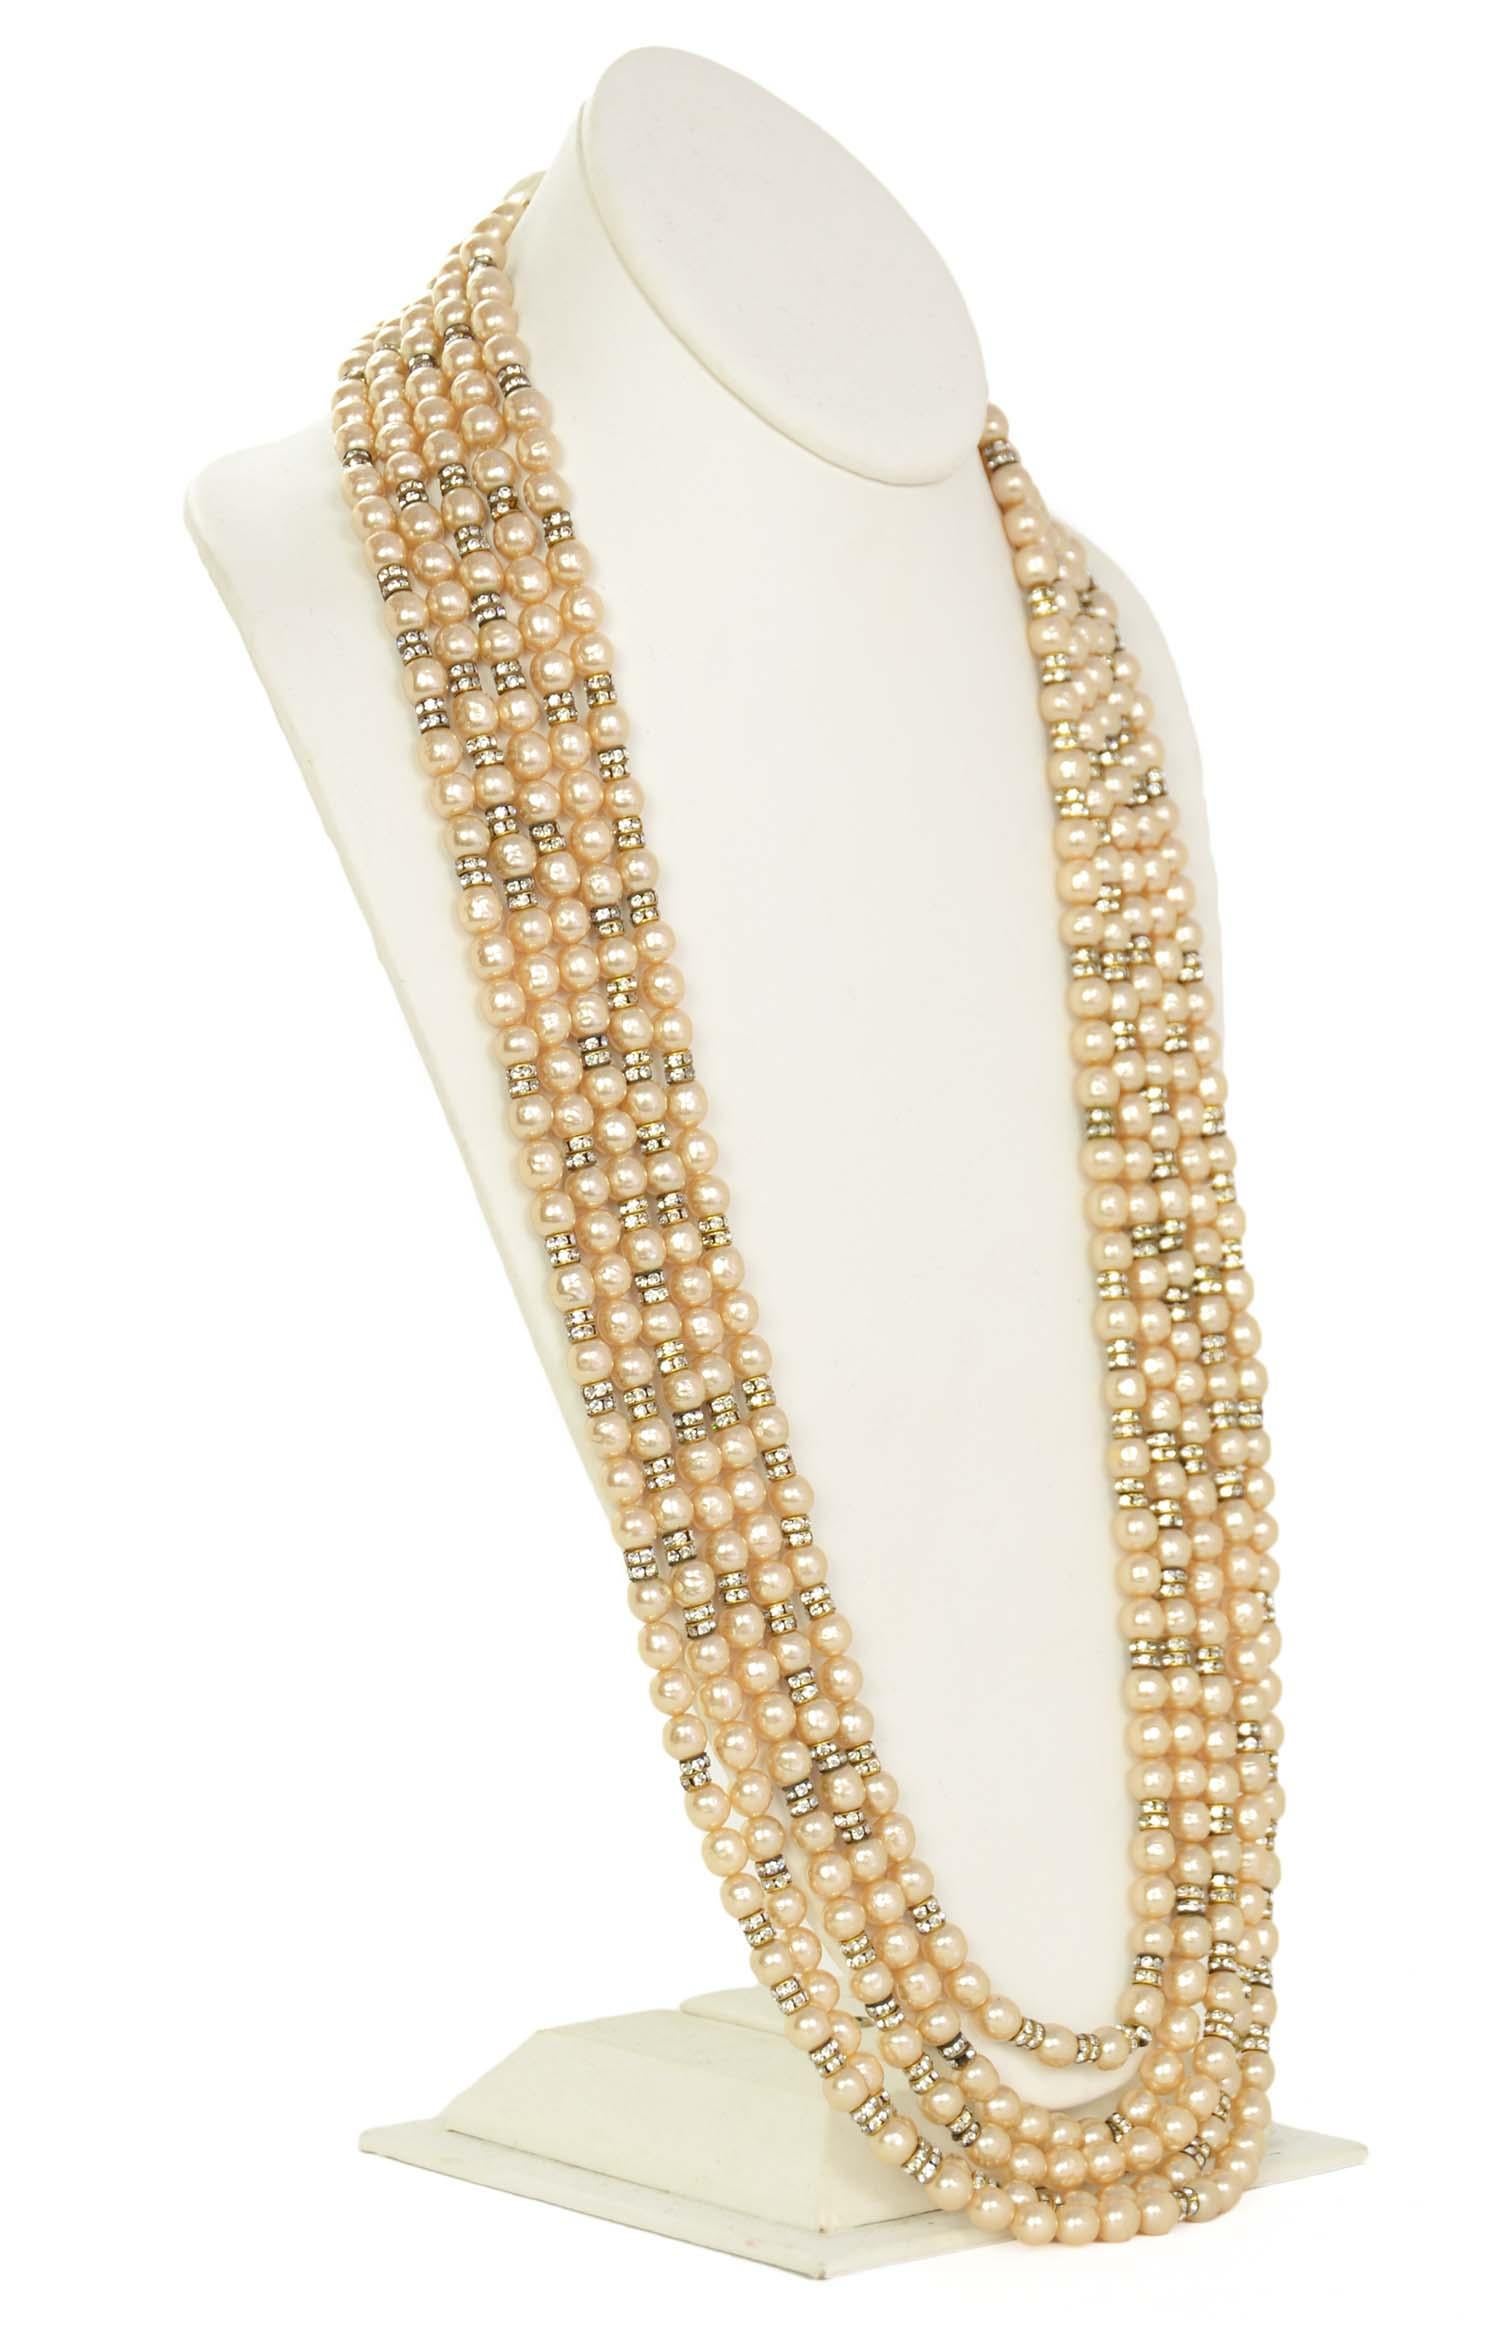 Brilliant Cut Chanel Vintage 1990s Multi-Strand Faux Pearl & Crystal Rondelle Necklace For Sale